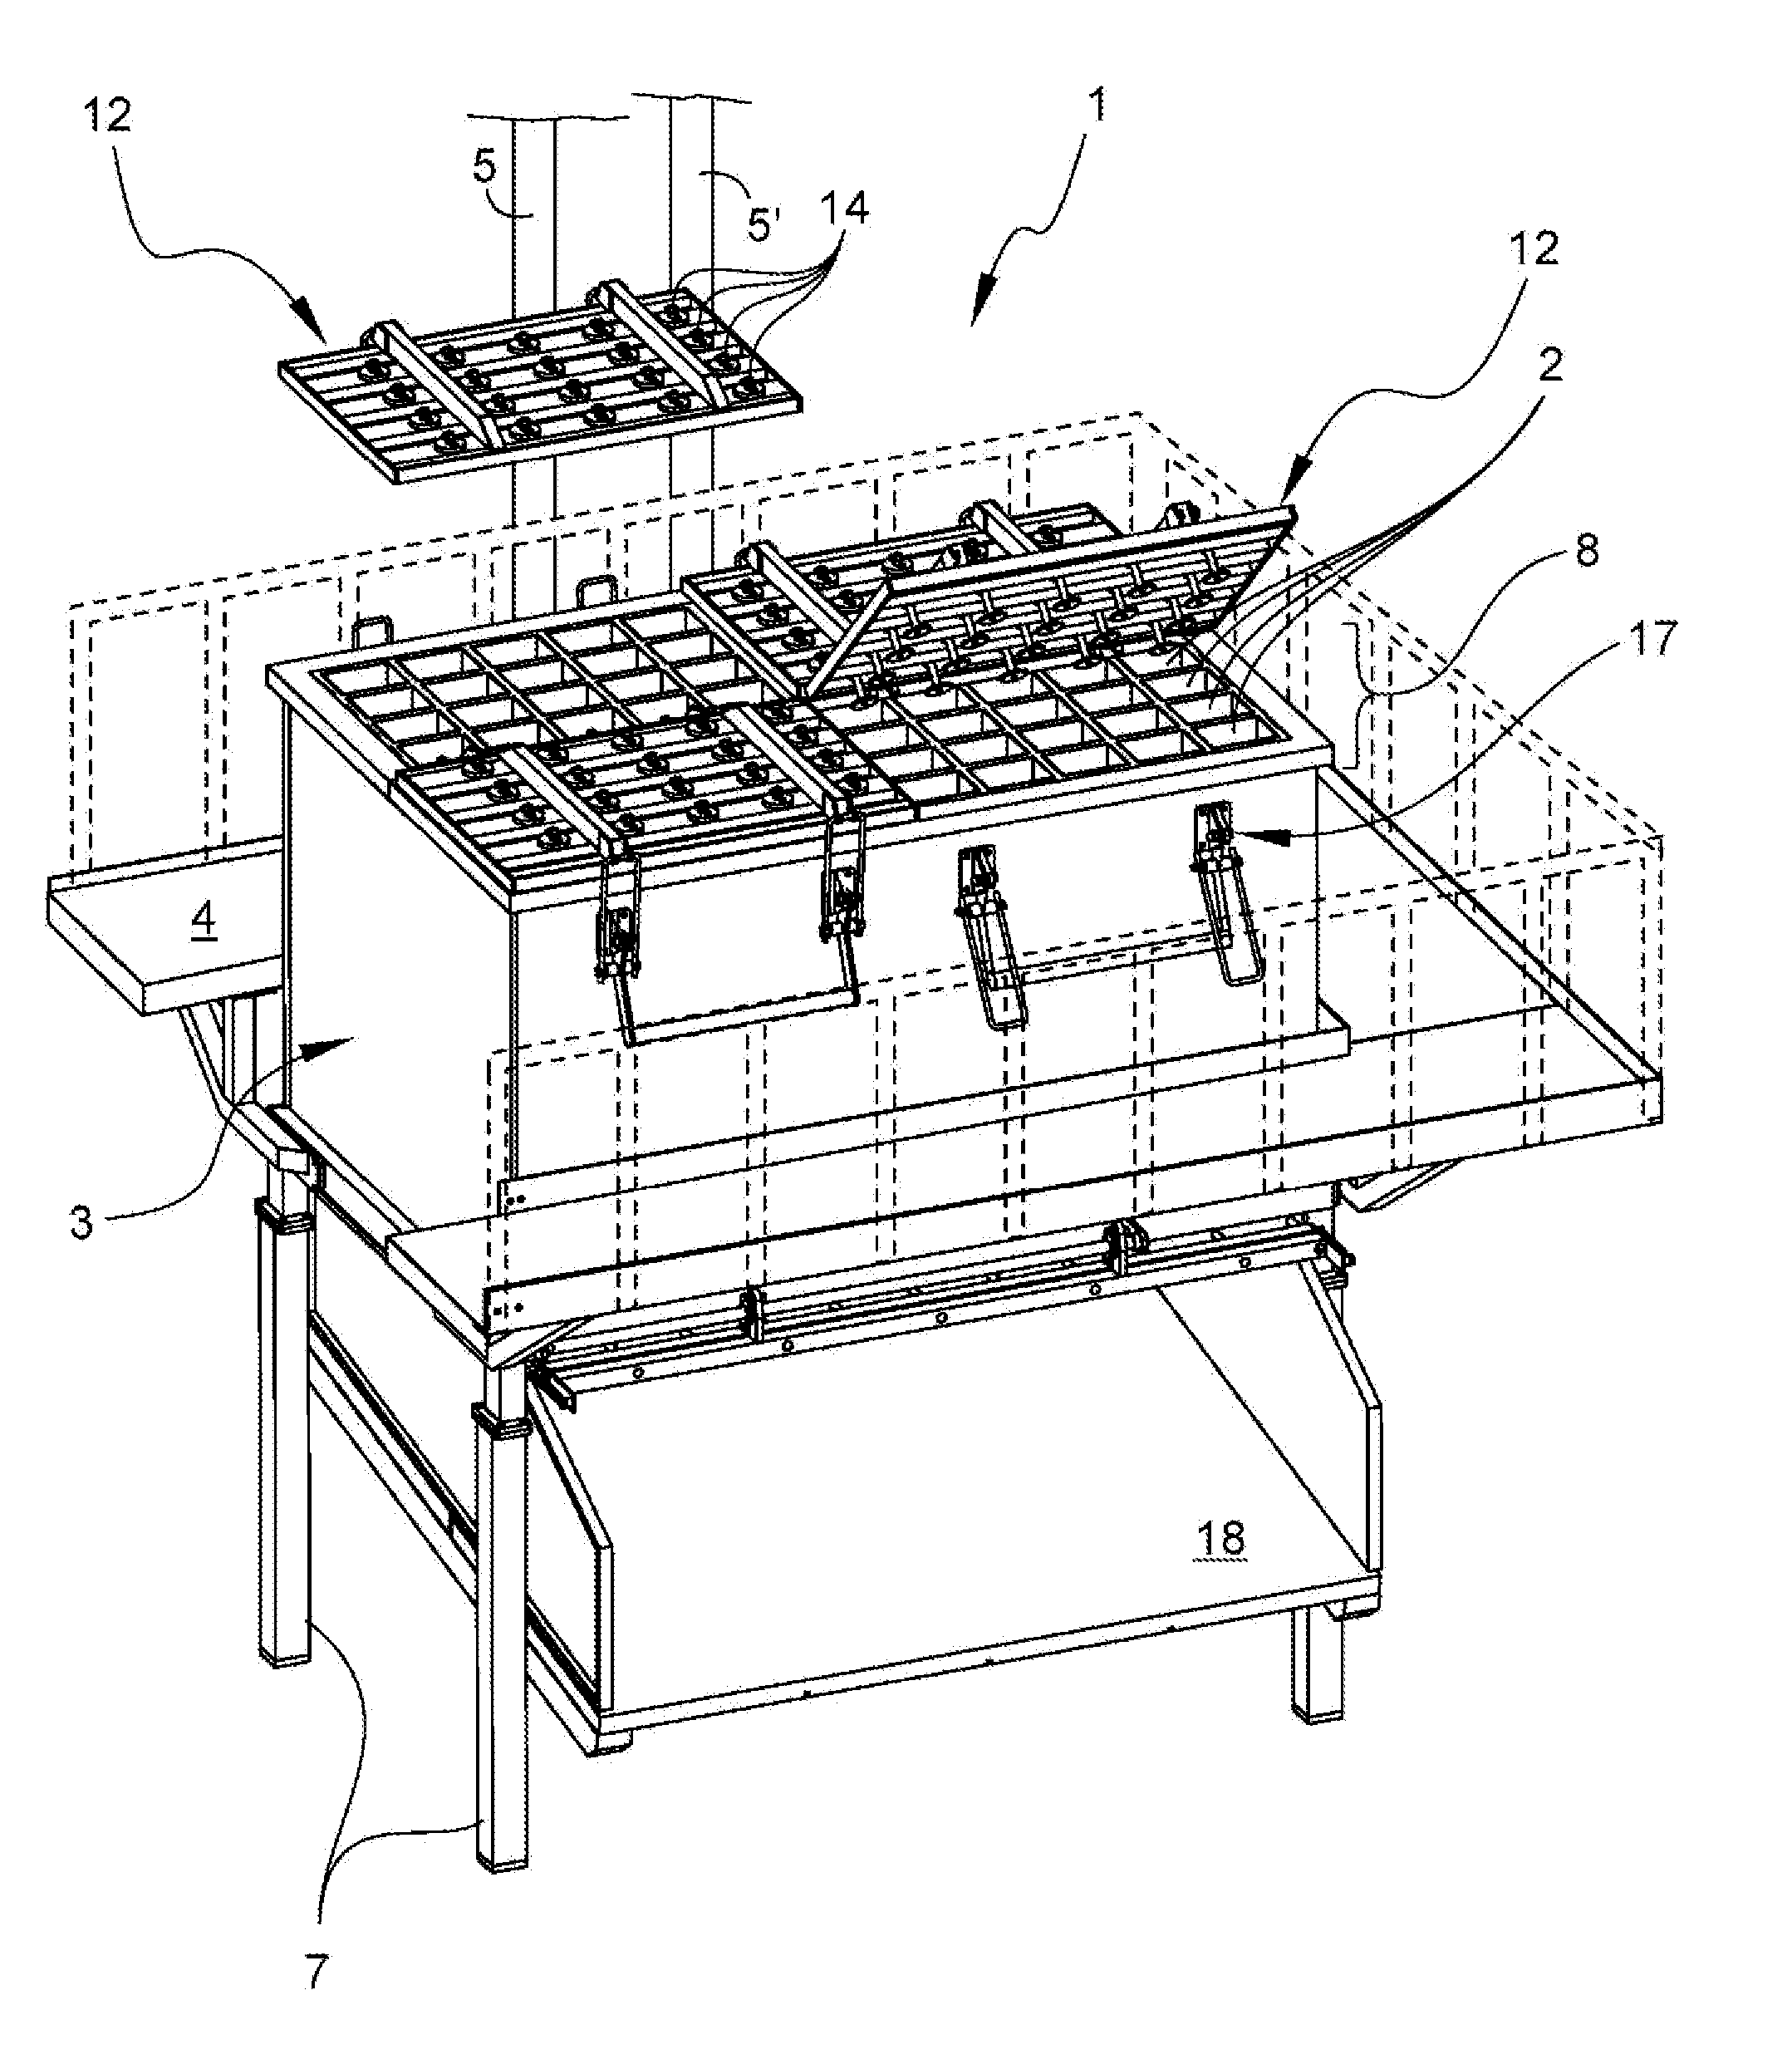 Apparatus and procedure for the molding and cooking of stuffed food products